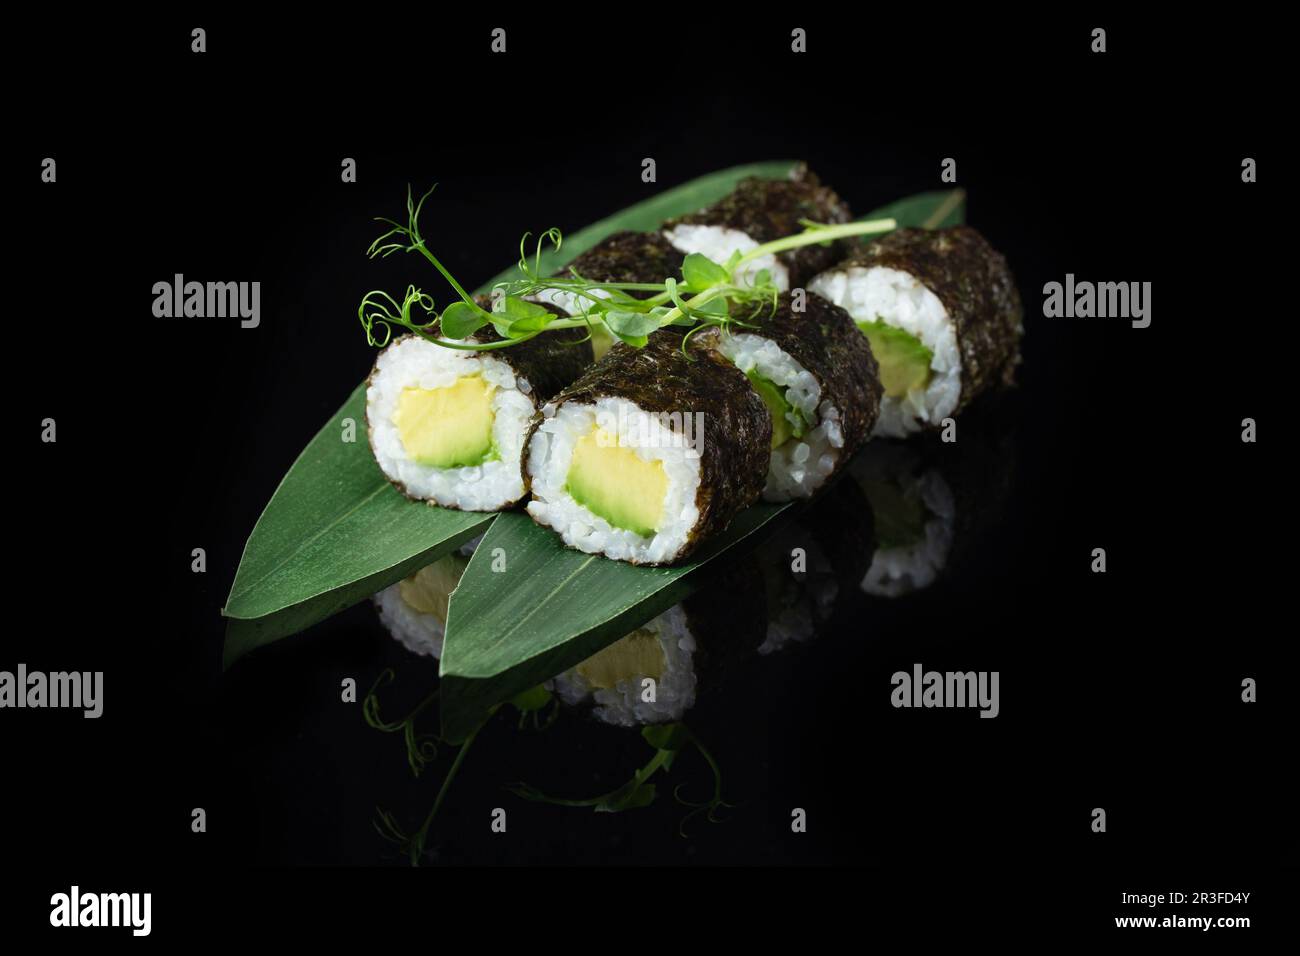 Traditional delicious fresh sushi roll set on a black background with reflection. Sushi roll with rice, nori, cream cheese, tobi Stock Photo